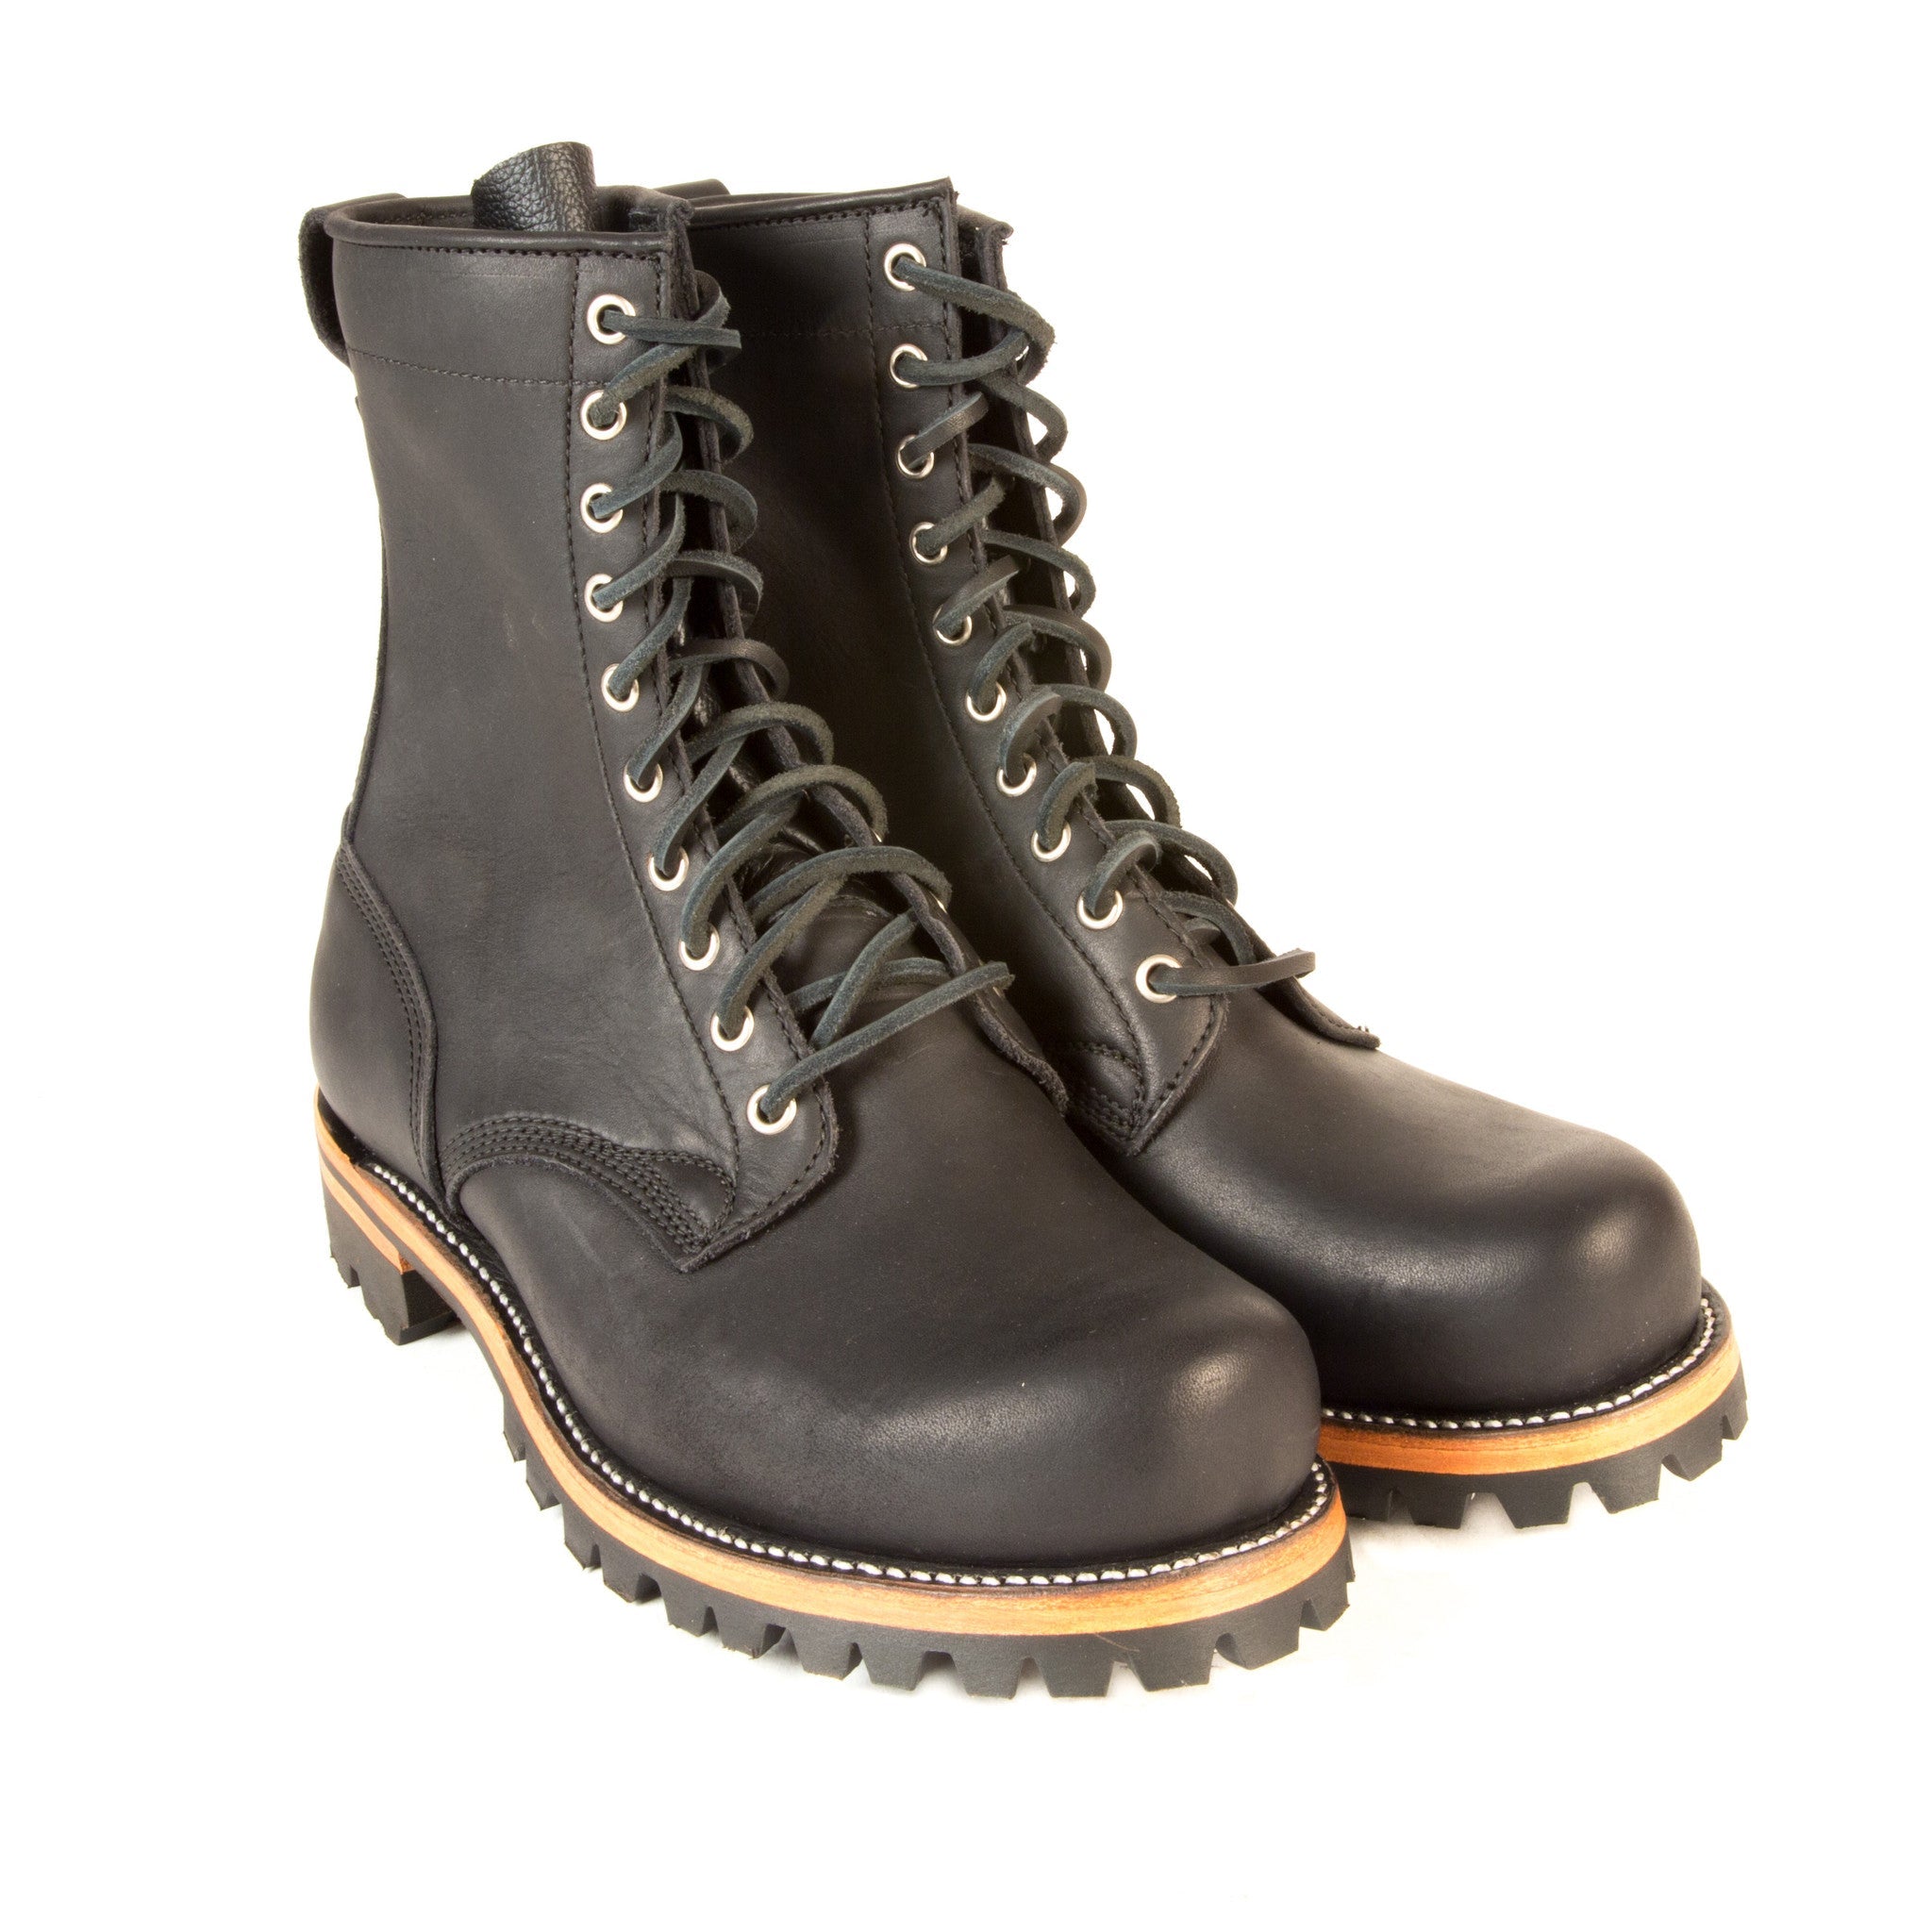 Ranger - Made to Order - Boots